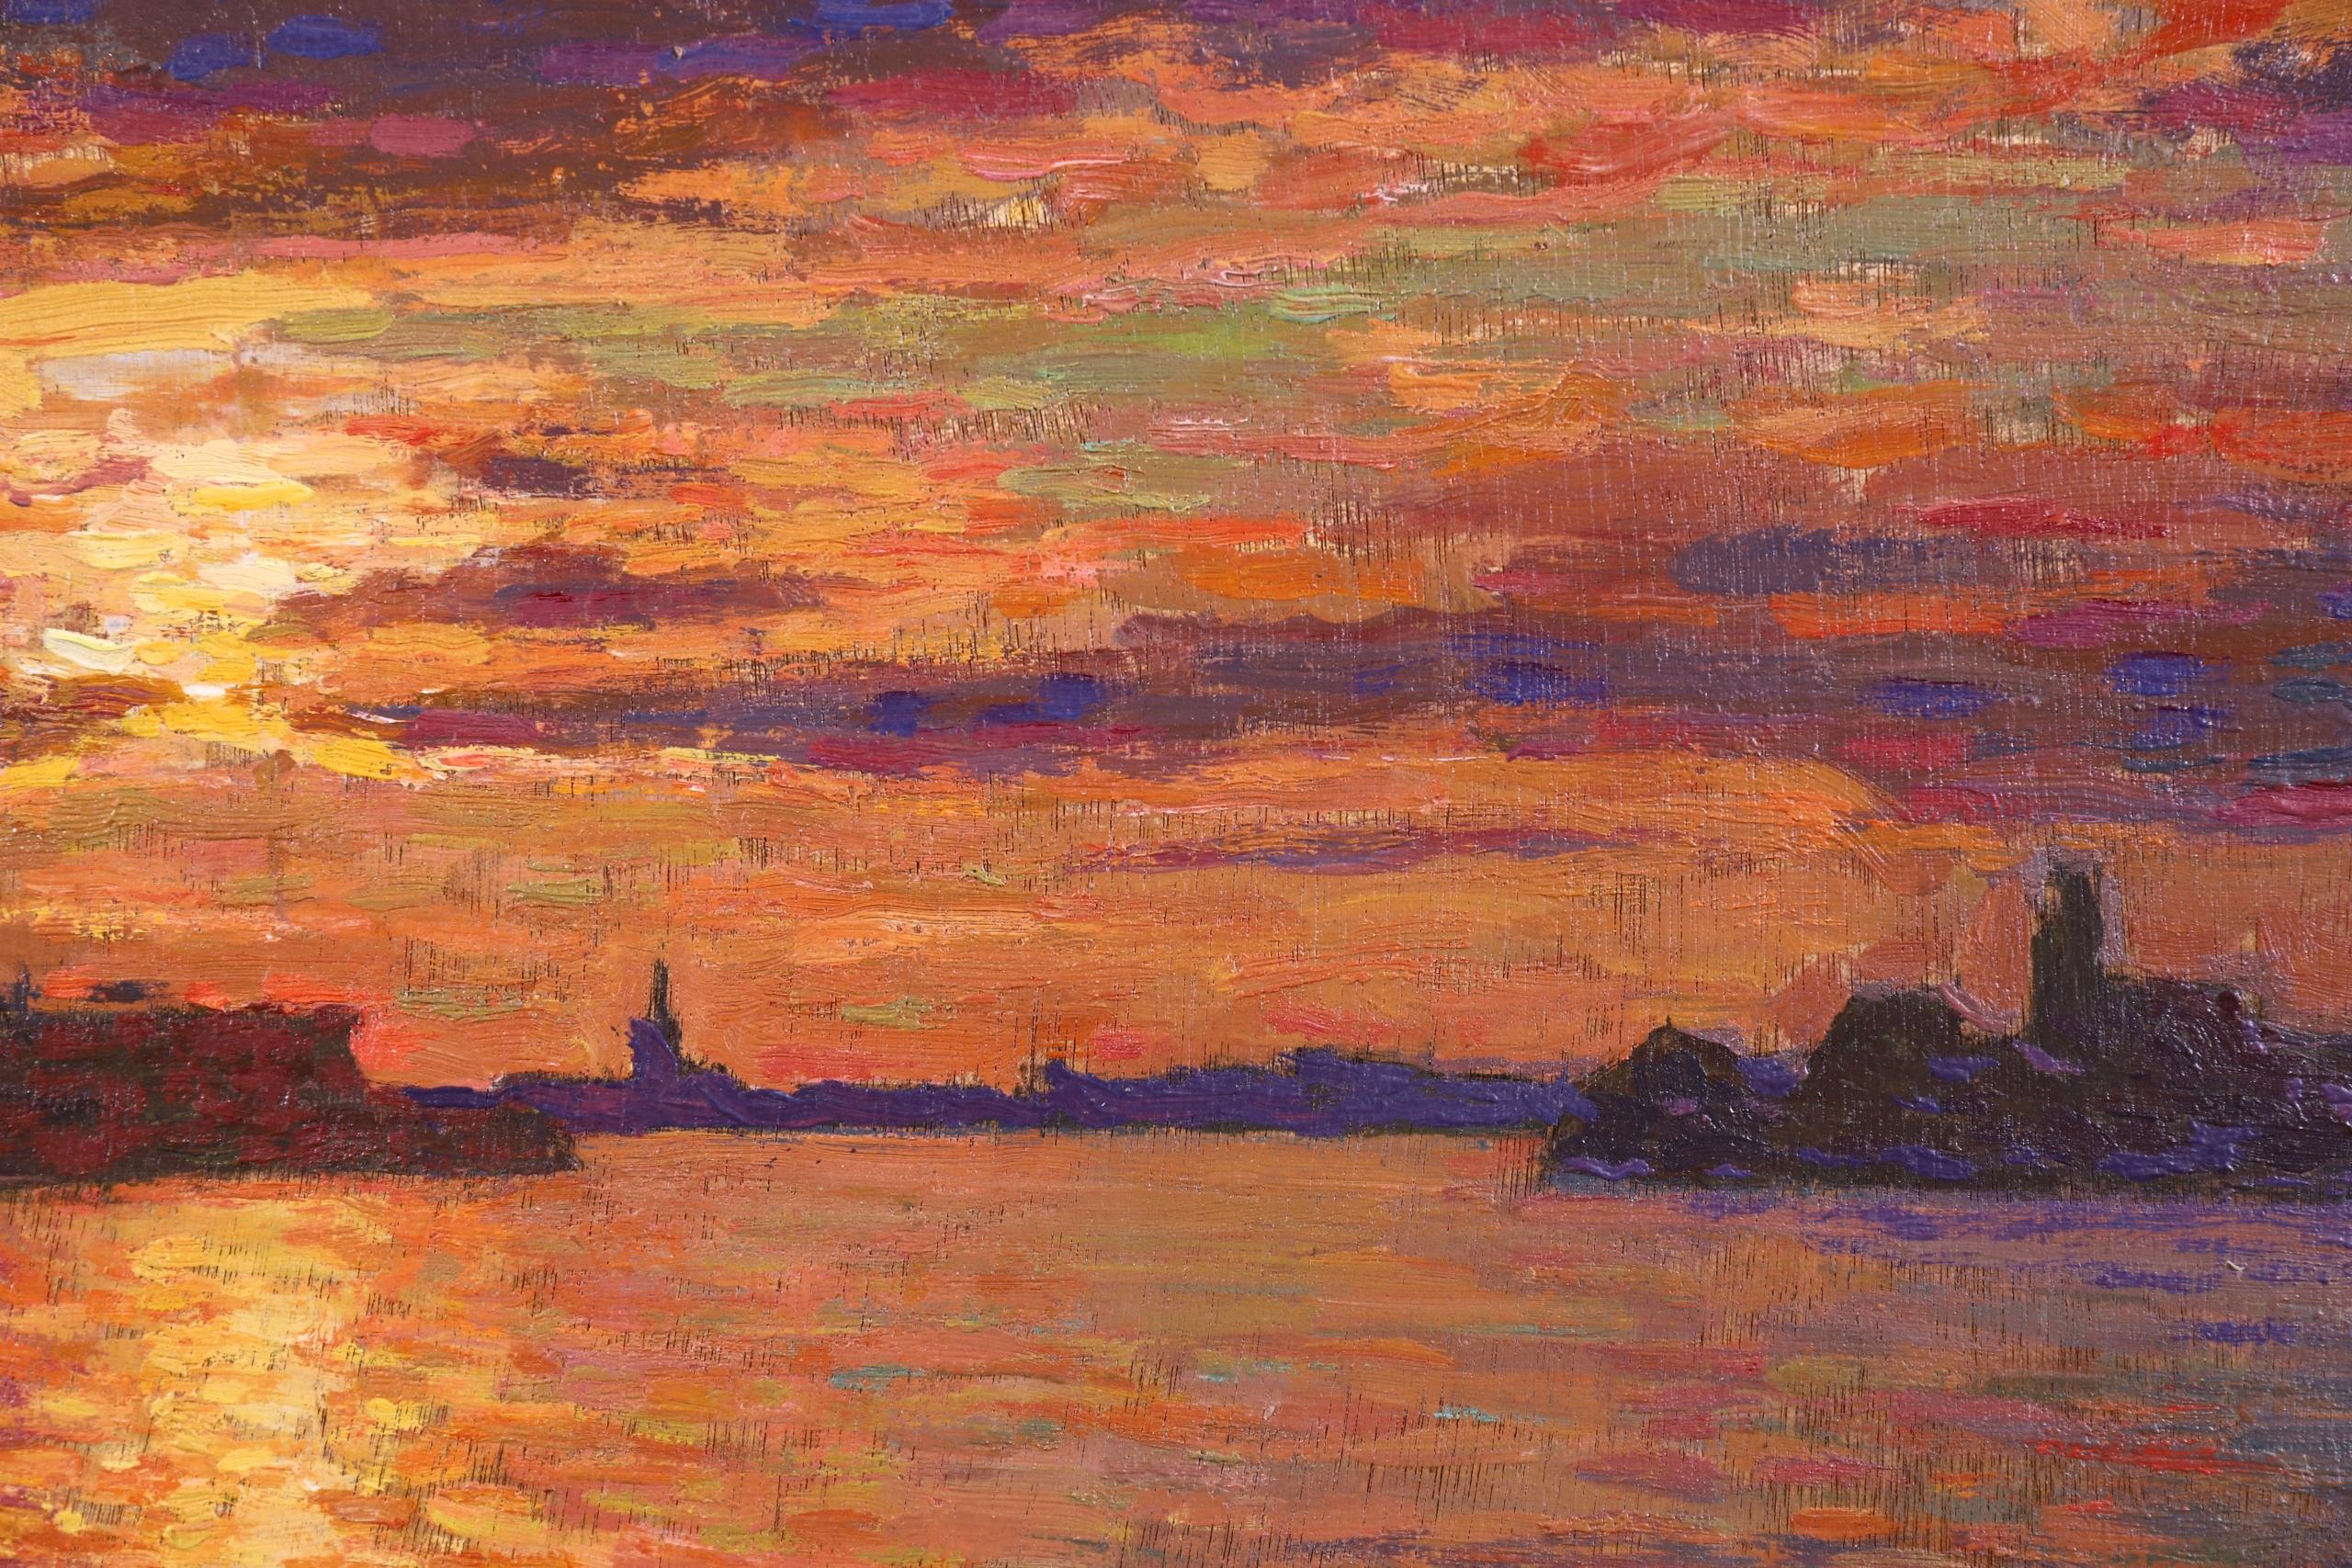 Sunset - Amsterdam - Post Impressionist Oil, Seascape - Jacques Martin-Ferrieres - Painting by Jacques Martin-Ferrières